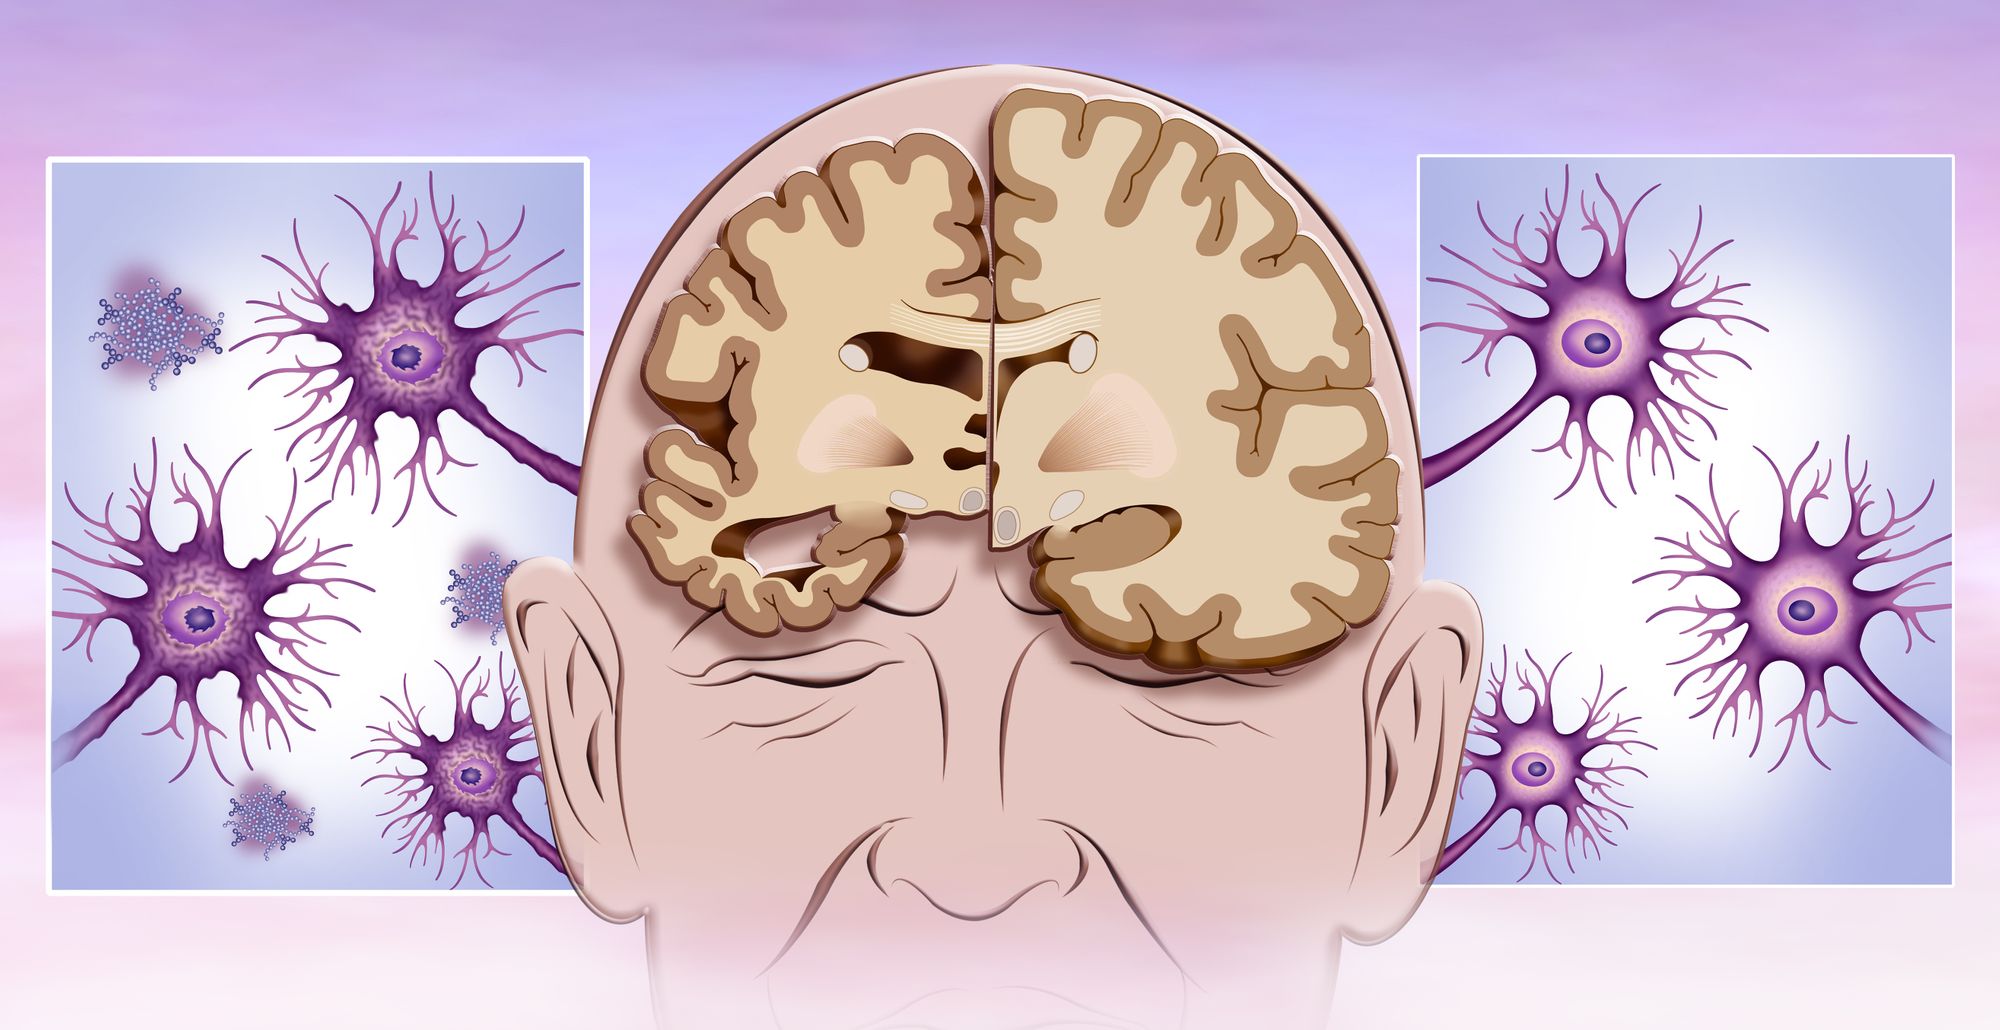 Stroke, Brain Injury, and Dementia: is there a link?